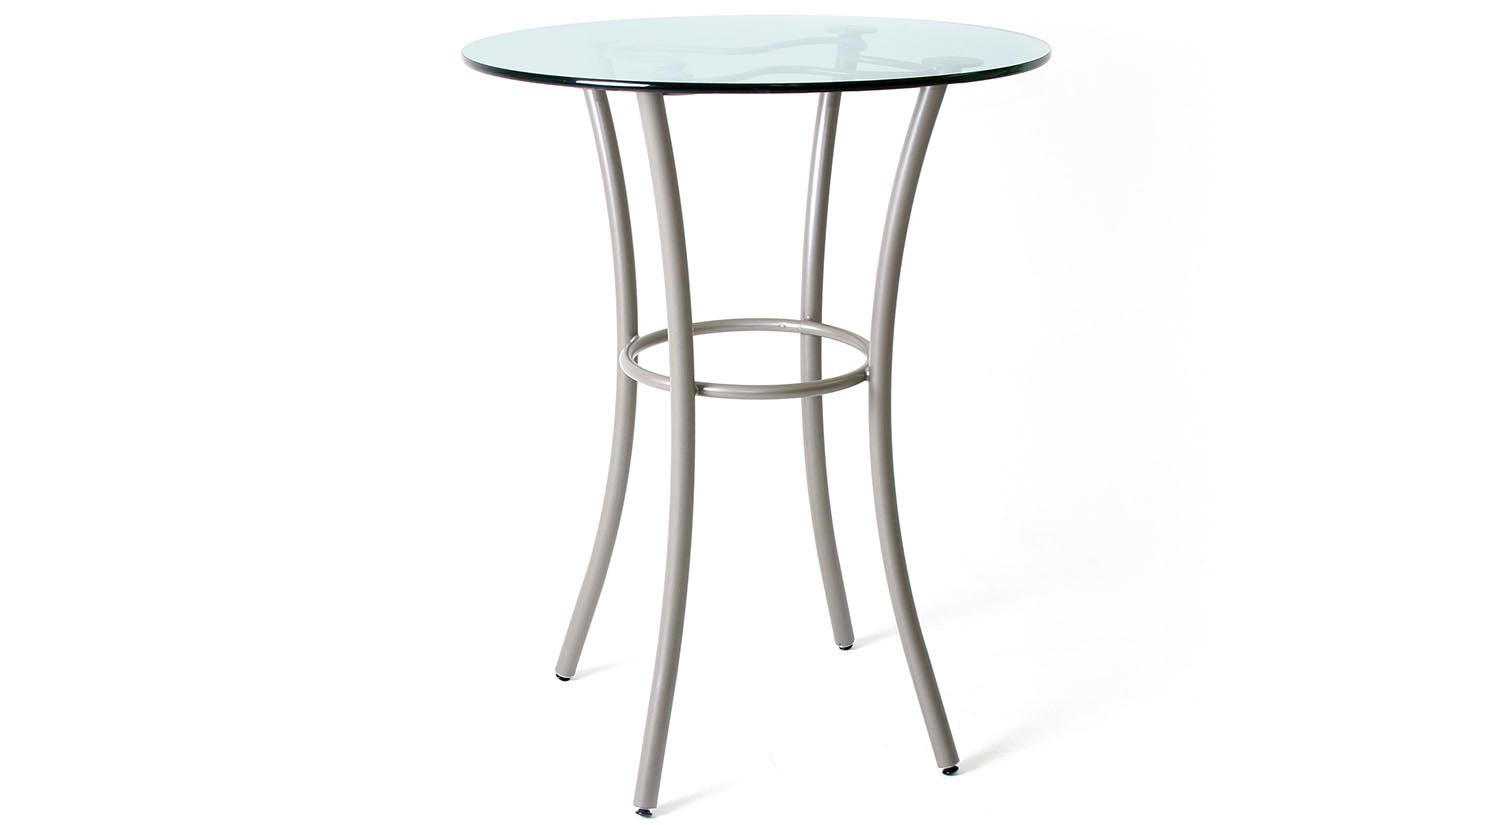 Lotus Pub Table Circle Furniture, Glass Top Pub Table And Chairs